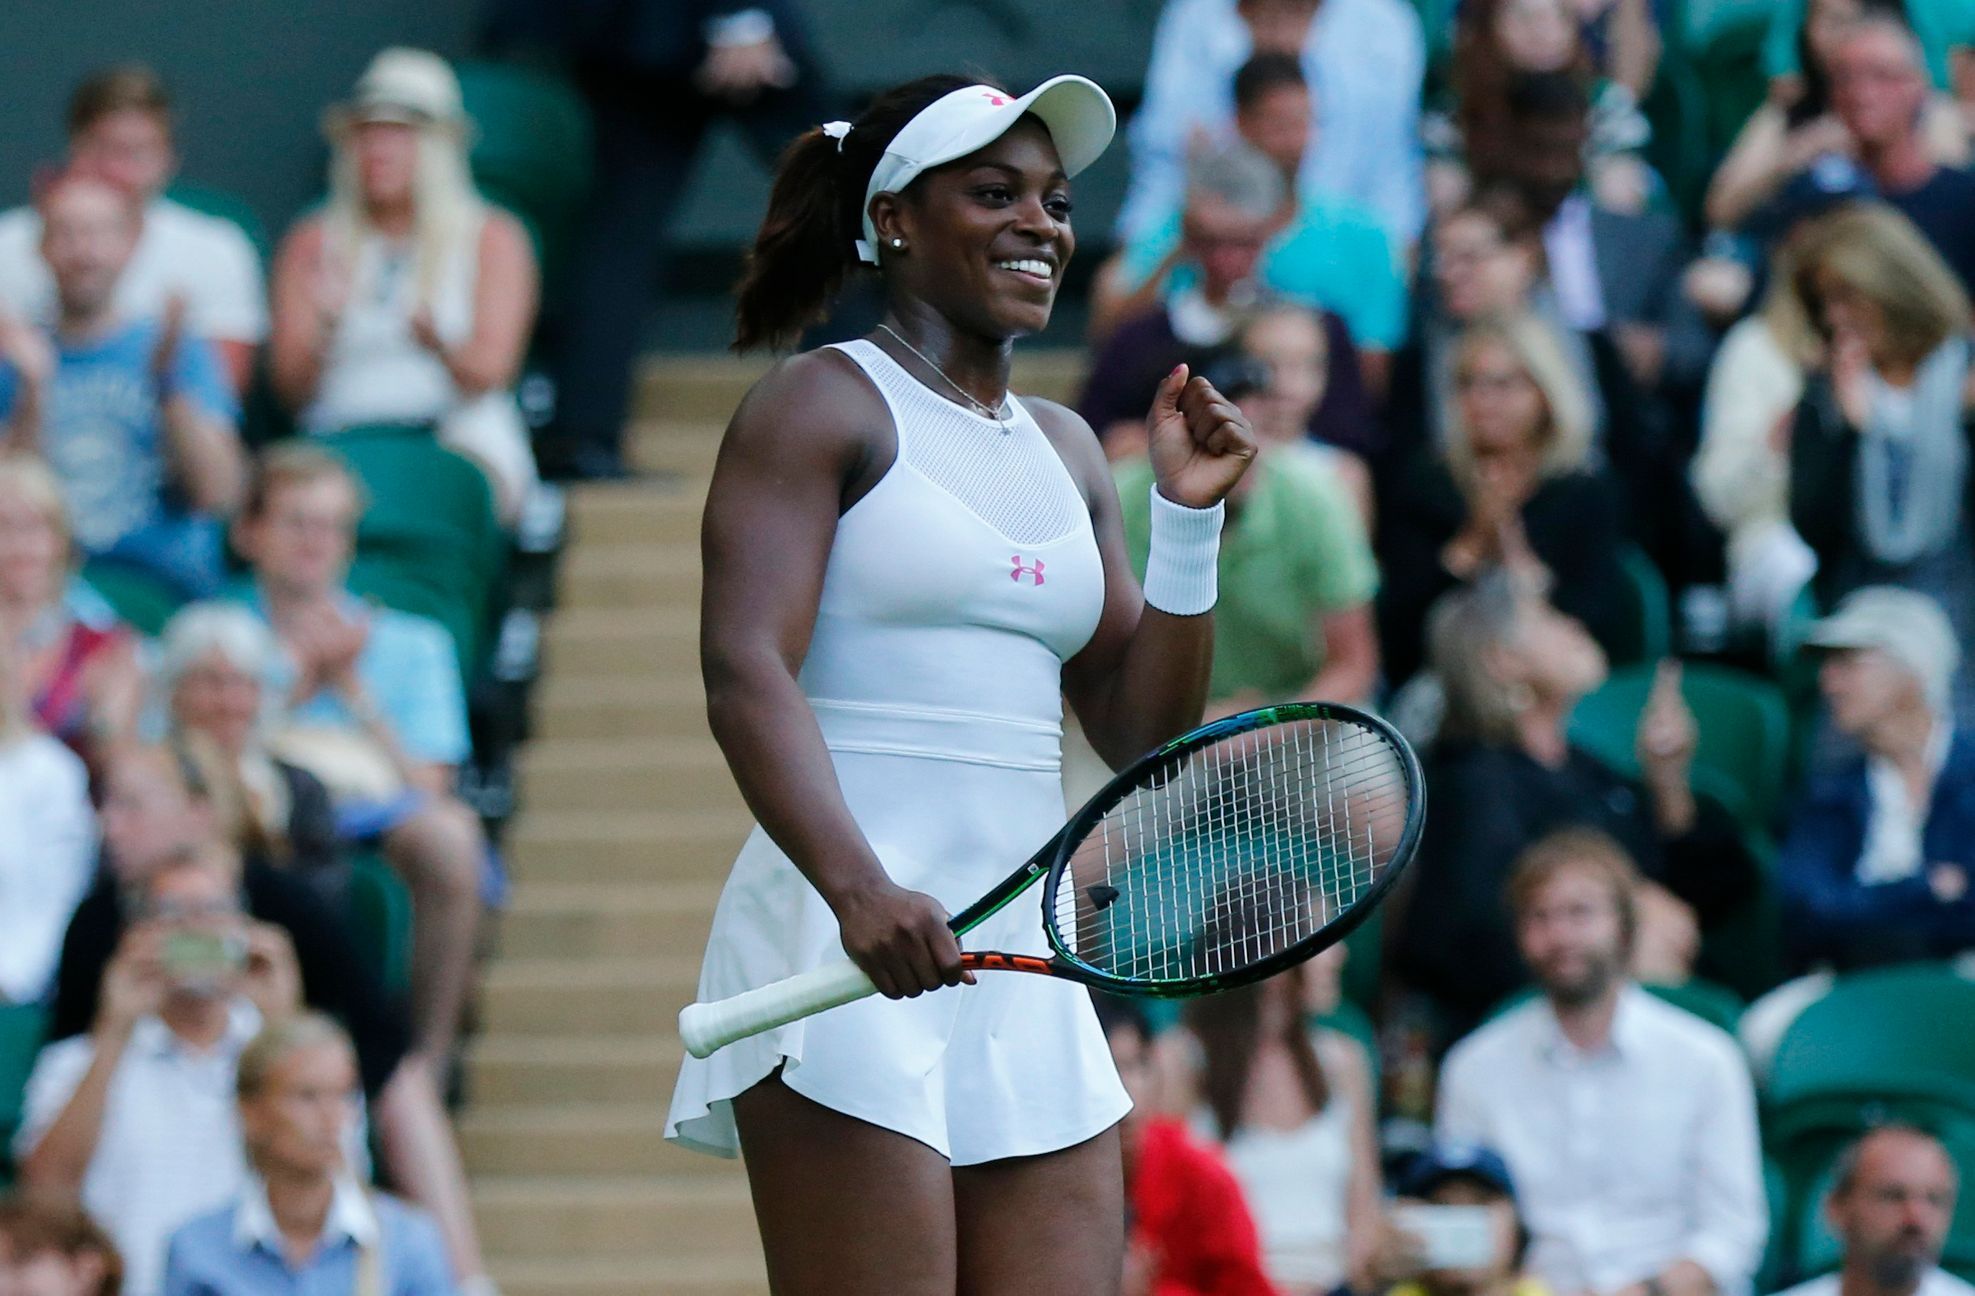 Sloane Stephens of the U.S.A. pumps her fist during her match against Barbora Strycova of the Czech Republic at the Wimbledon Tennis Championships in London